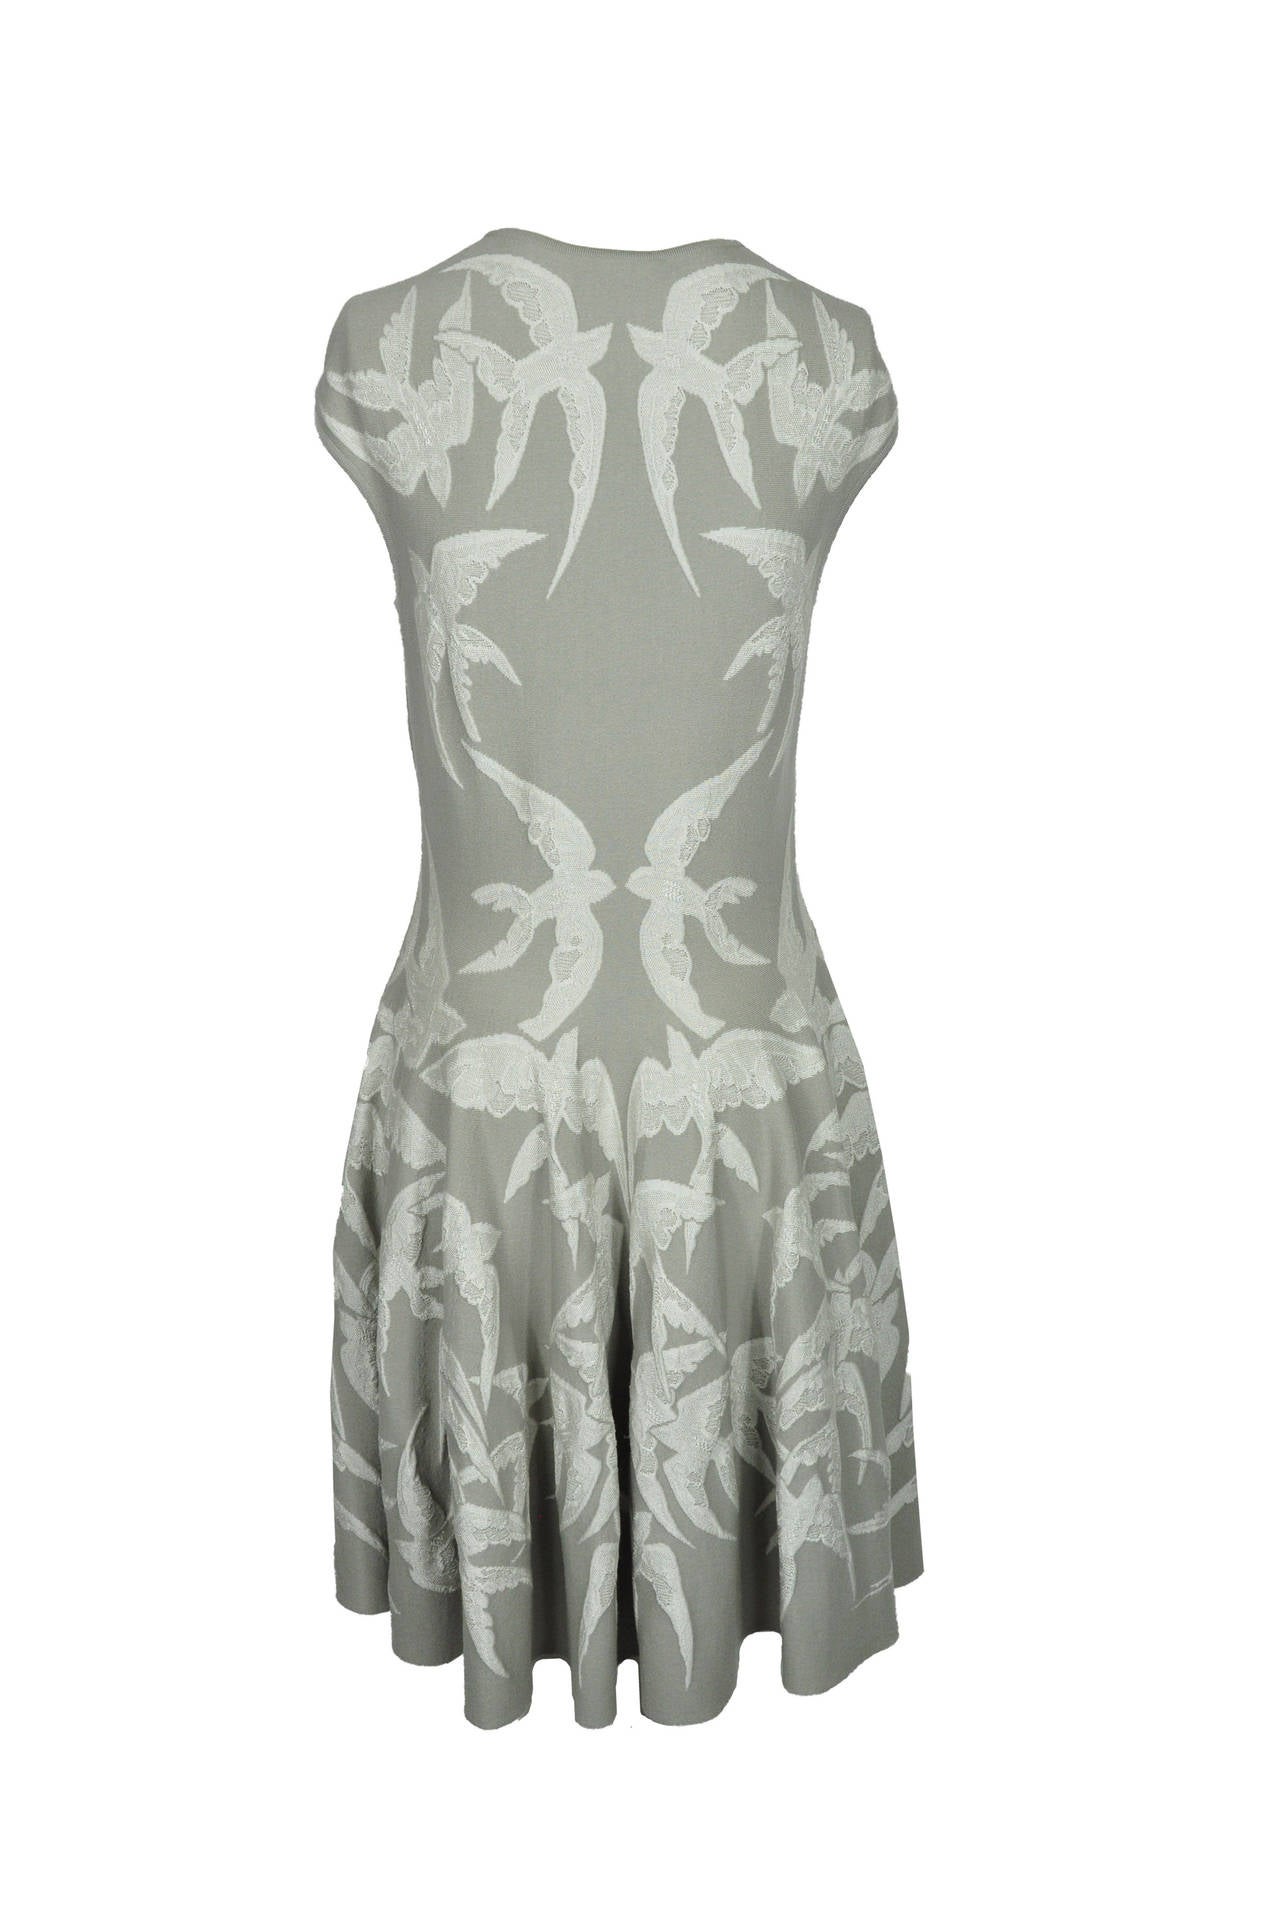 A slip on Alexander McQueen capped sleeves dress features a fitted silhouette with all over swallow embroidery. This knee length style nips in at the waist and has gentle pleating at the skirt. Size is medium